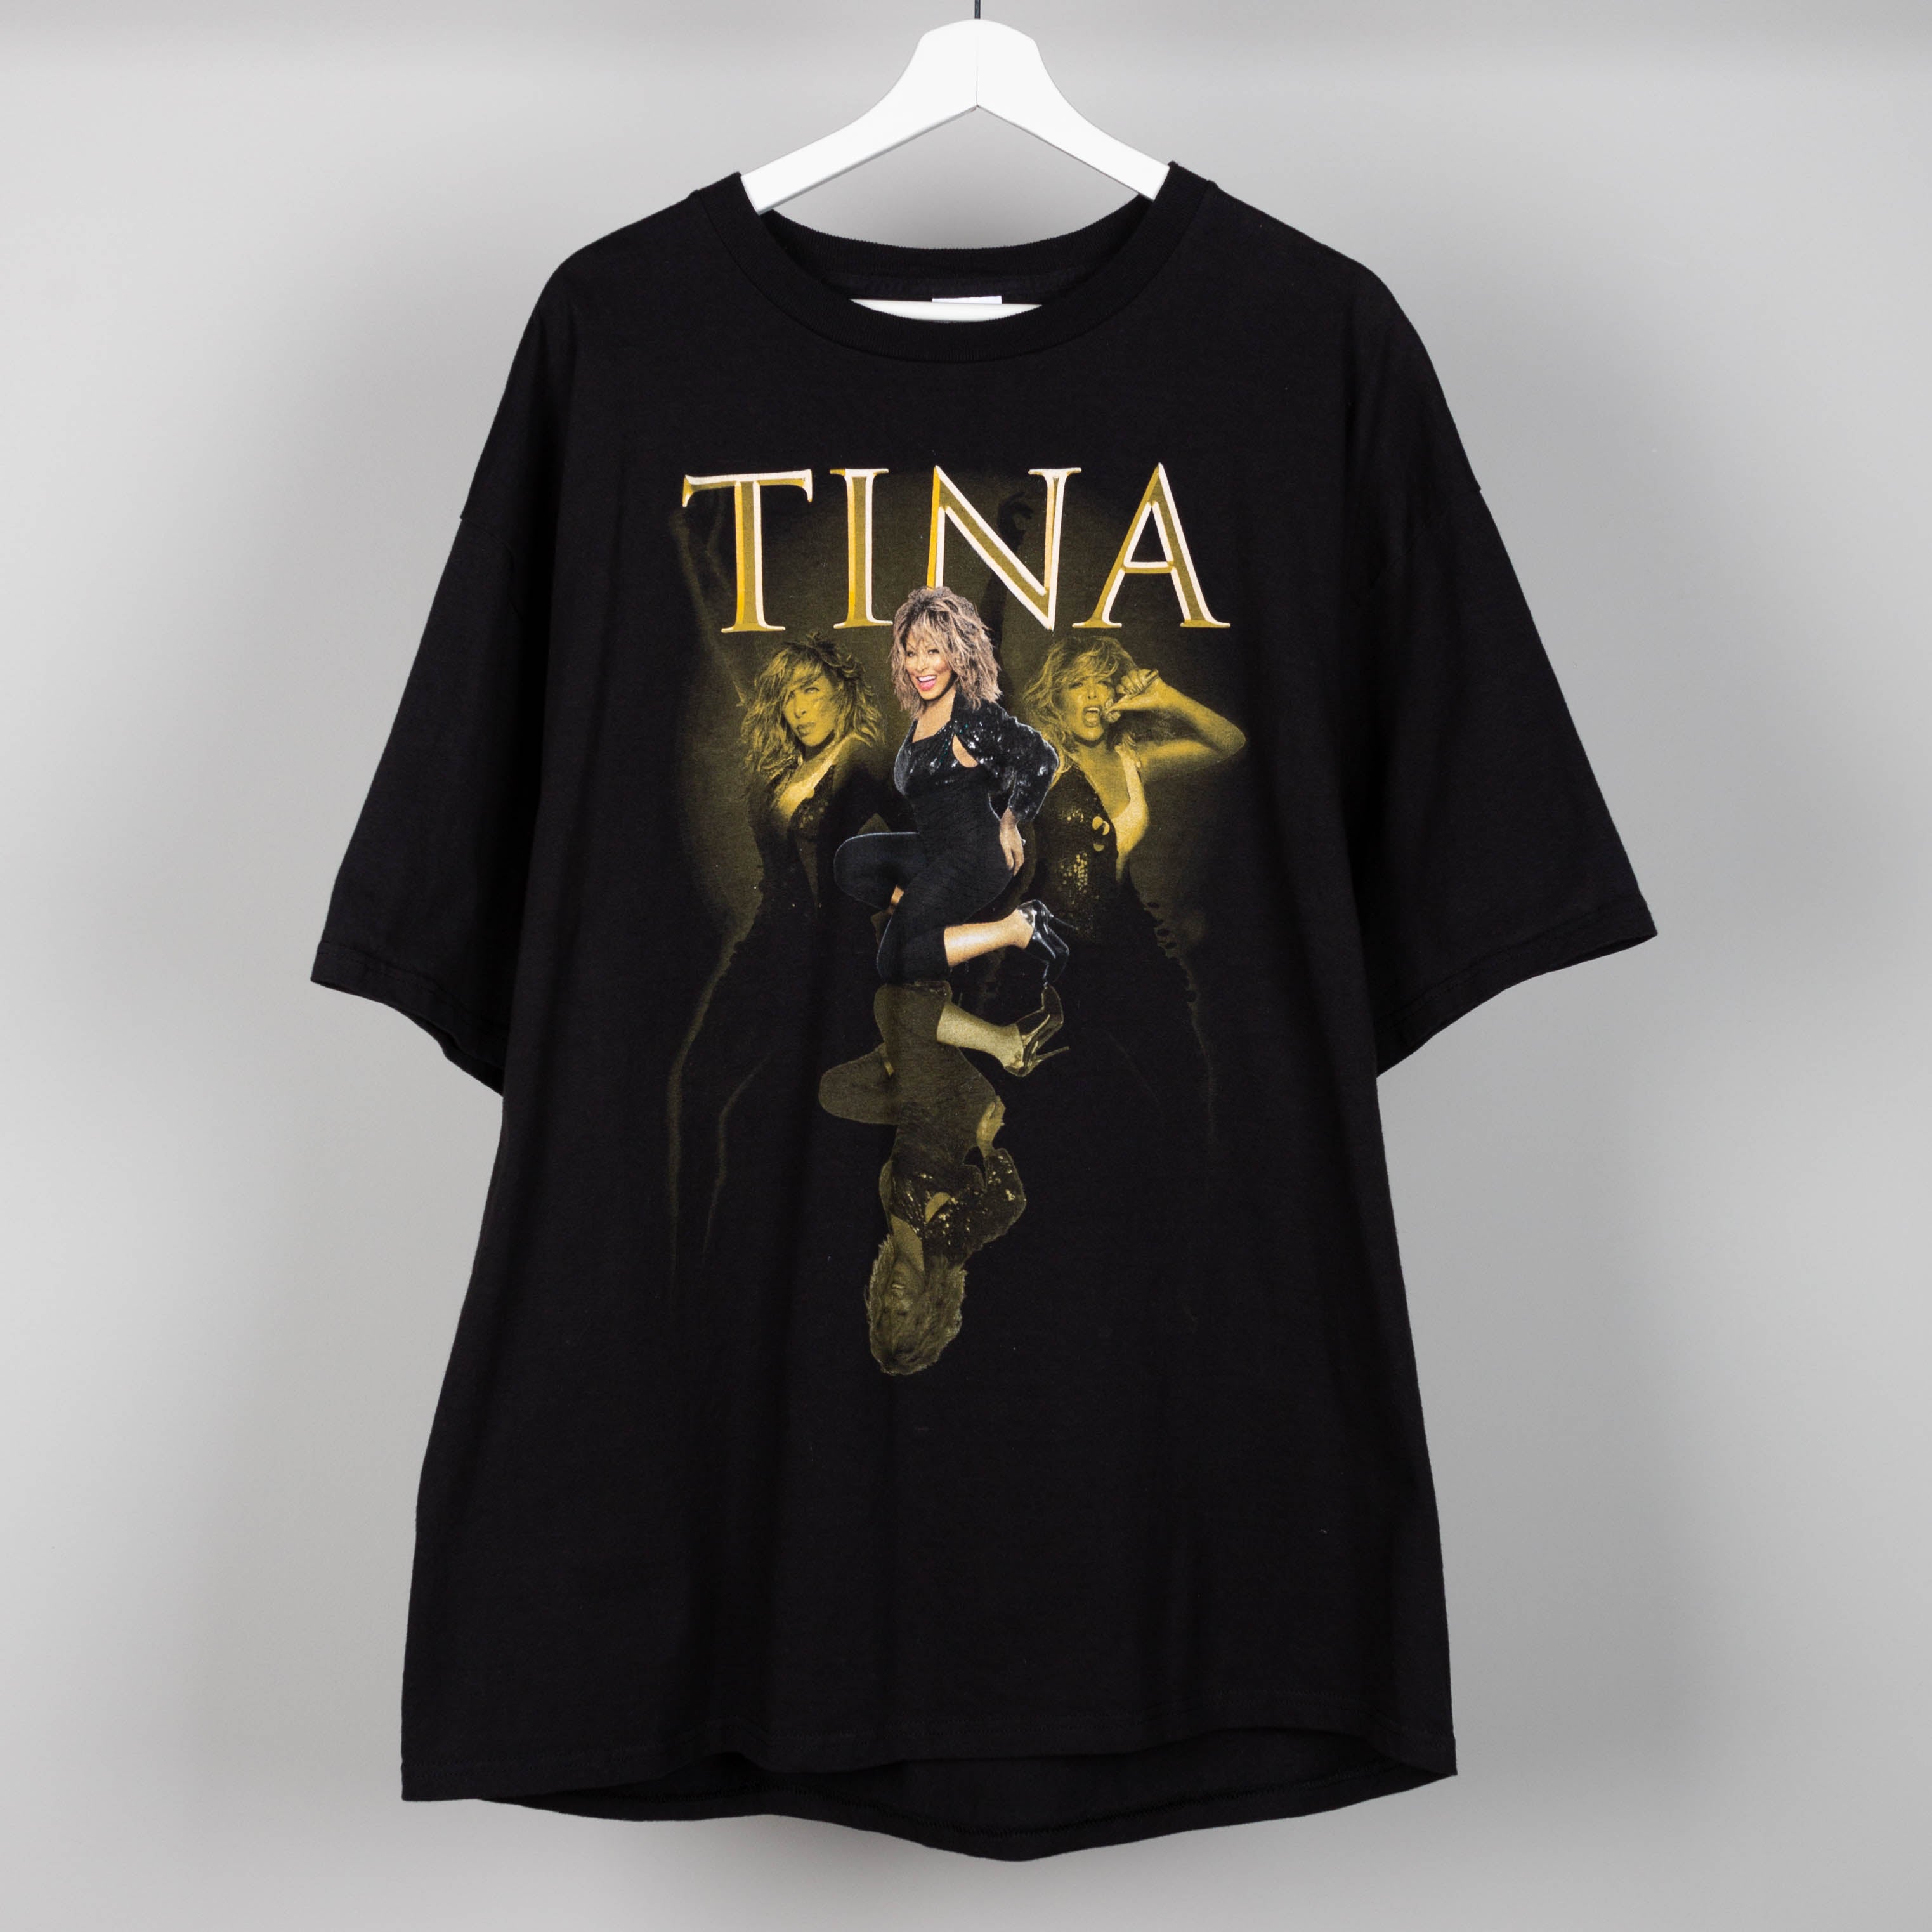 Y2K Tina Turner Live In Concert T-Shirt Size XXL